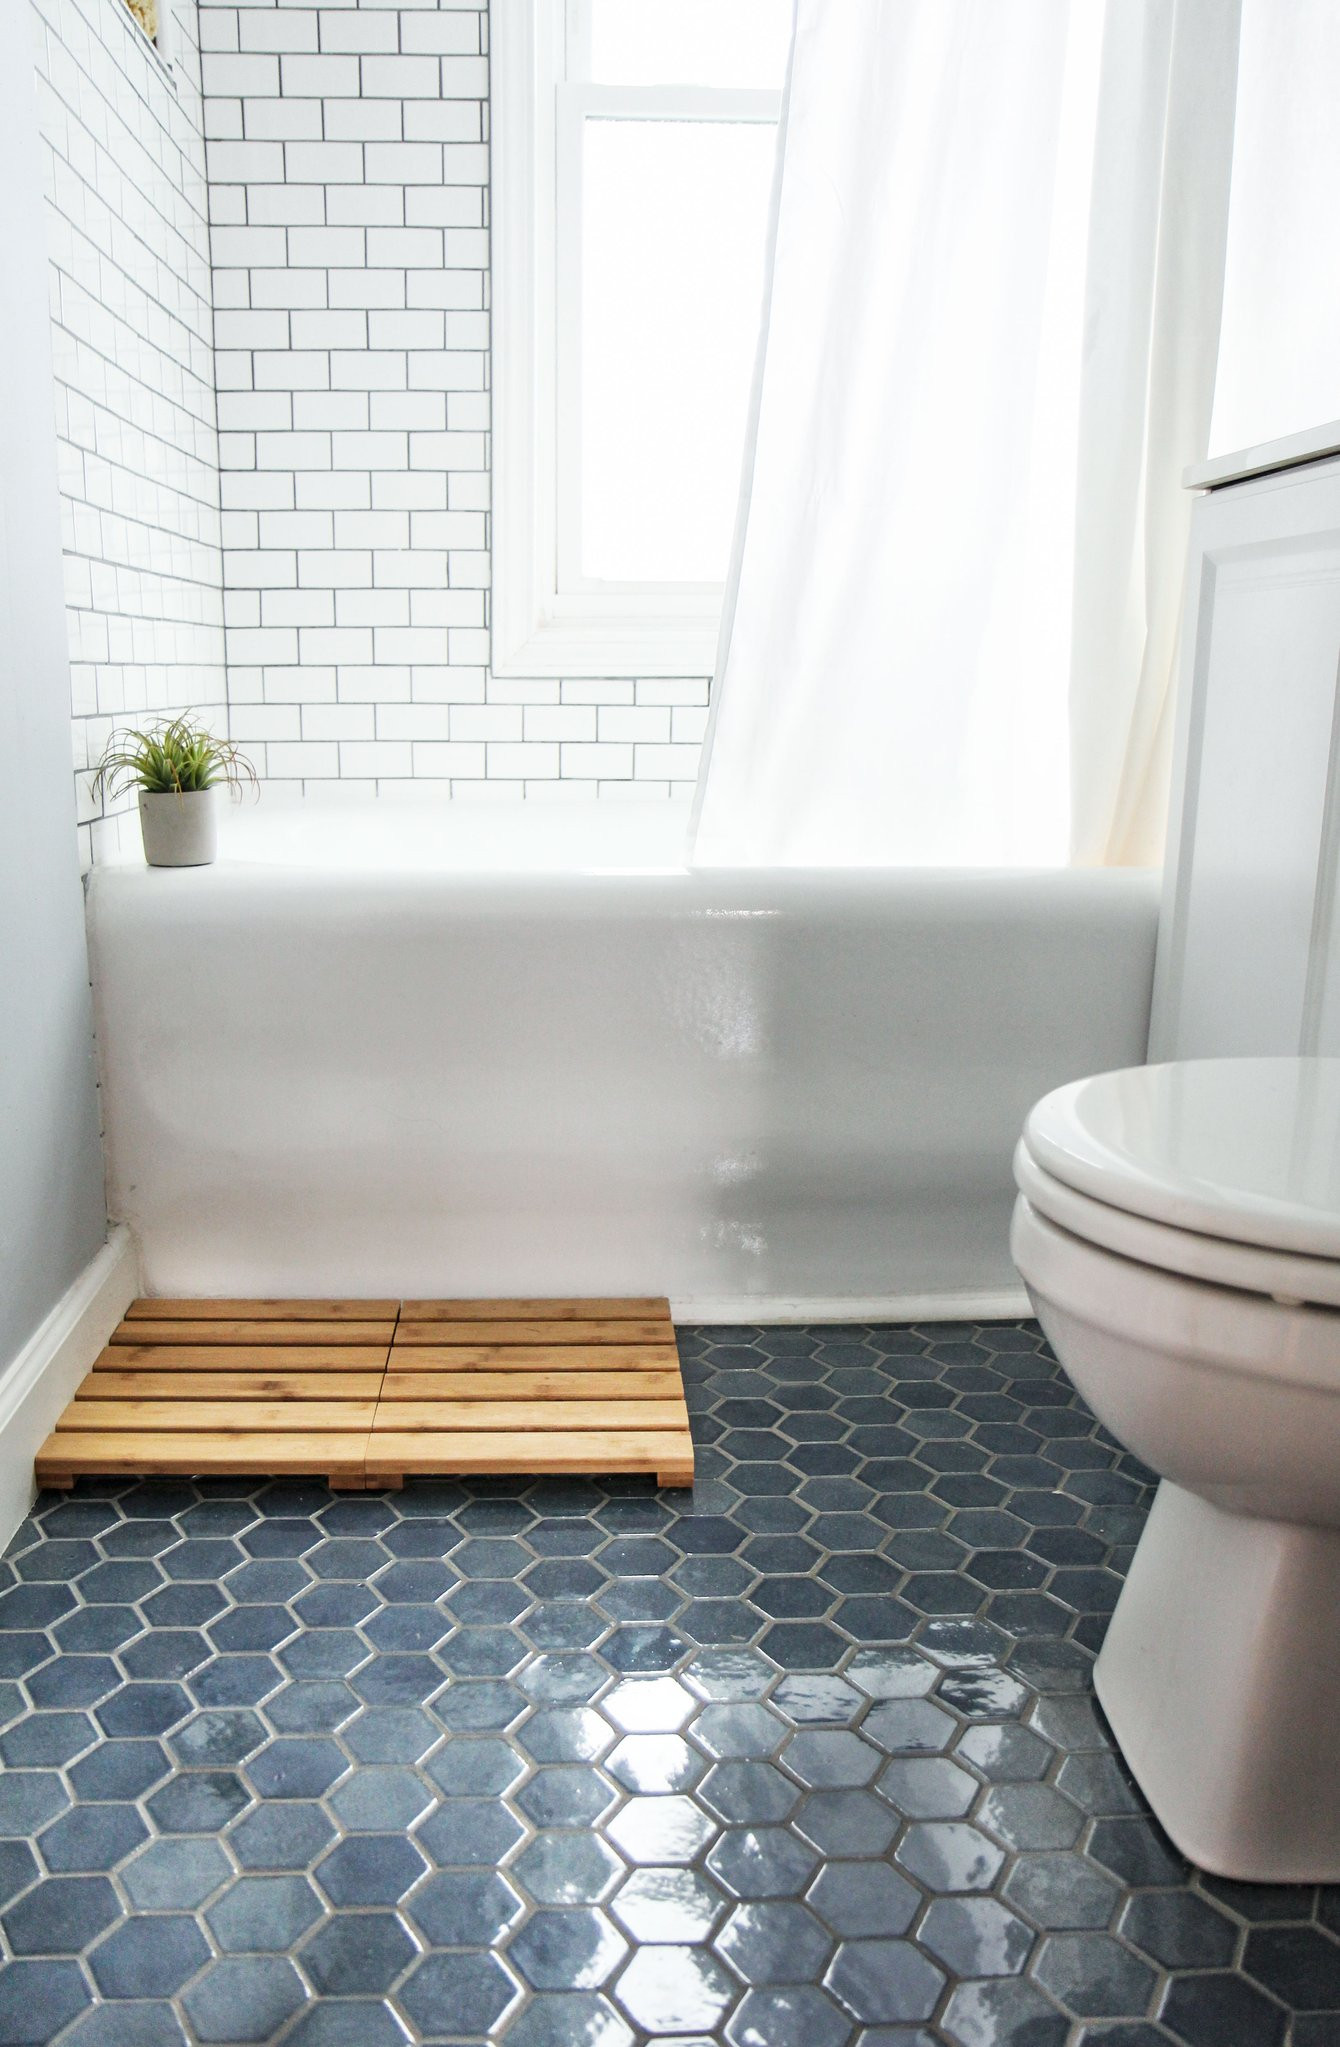 Floor Tiles For Bathrooms
 8 Things I Learned During My Bathroom Tile Renovation